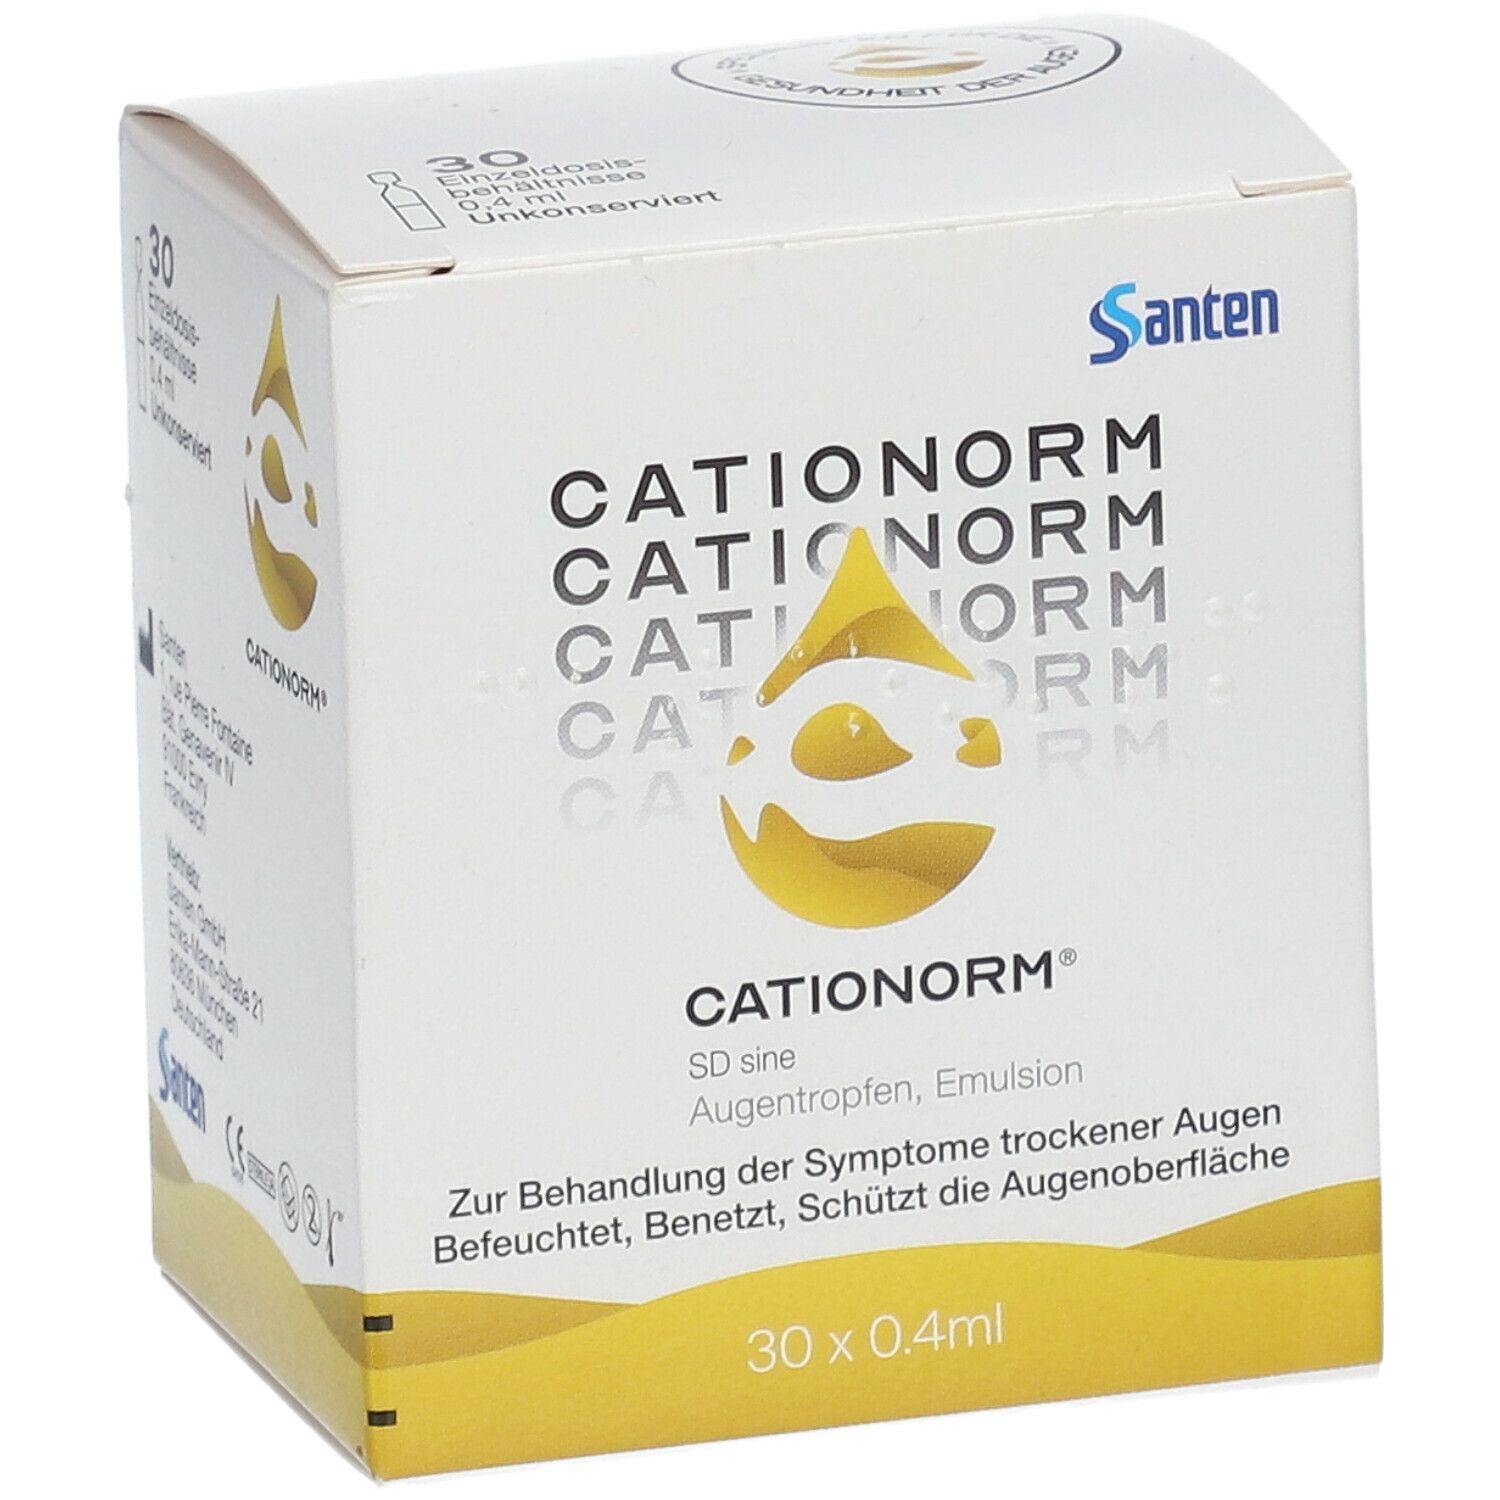 Cationorm® SD sine